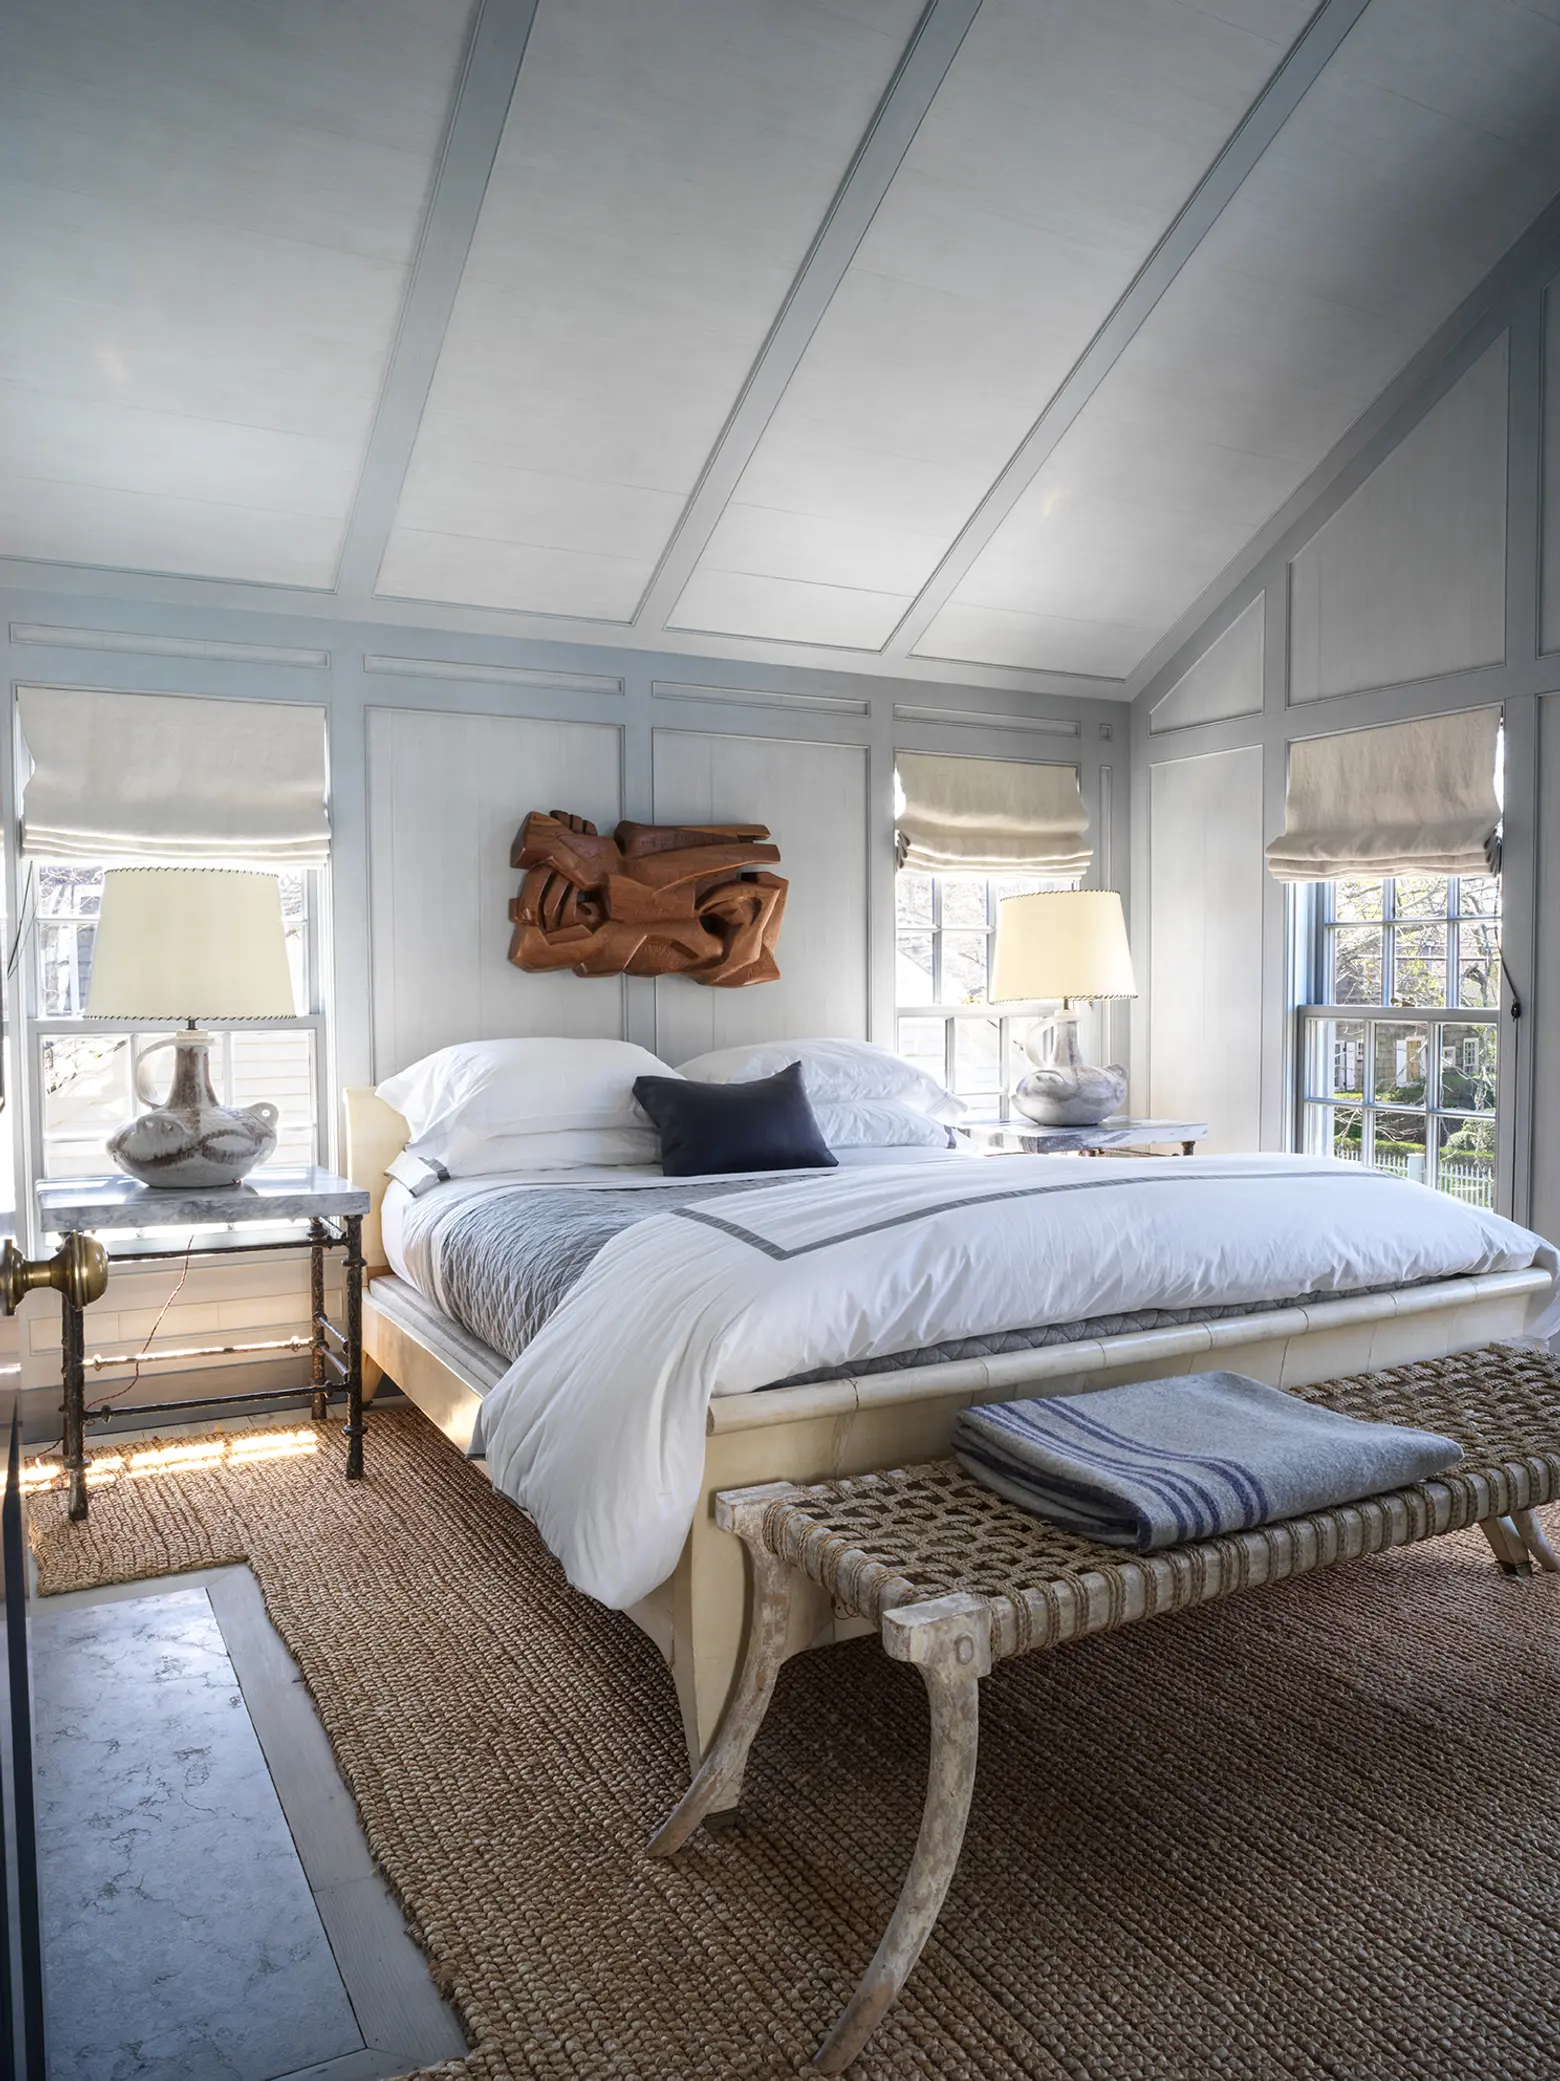 In the heart of Sag Harbor, a nautical gem designed by Steven Gambrel ...